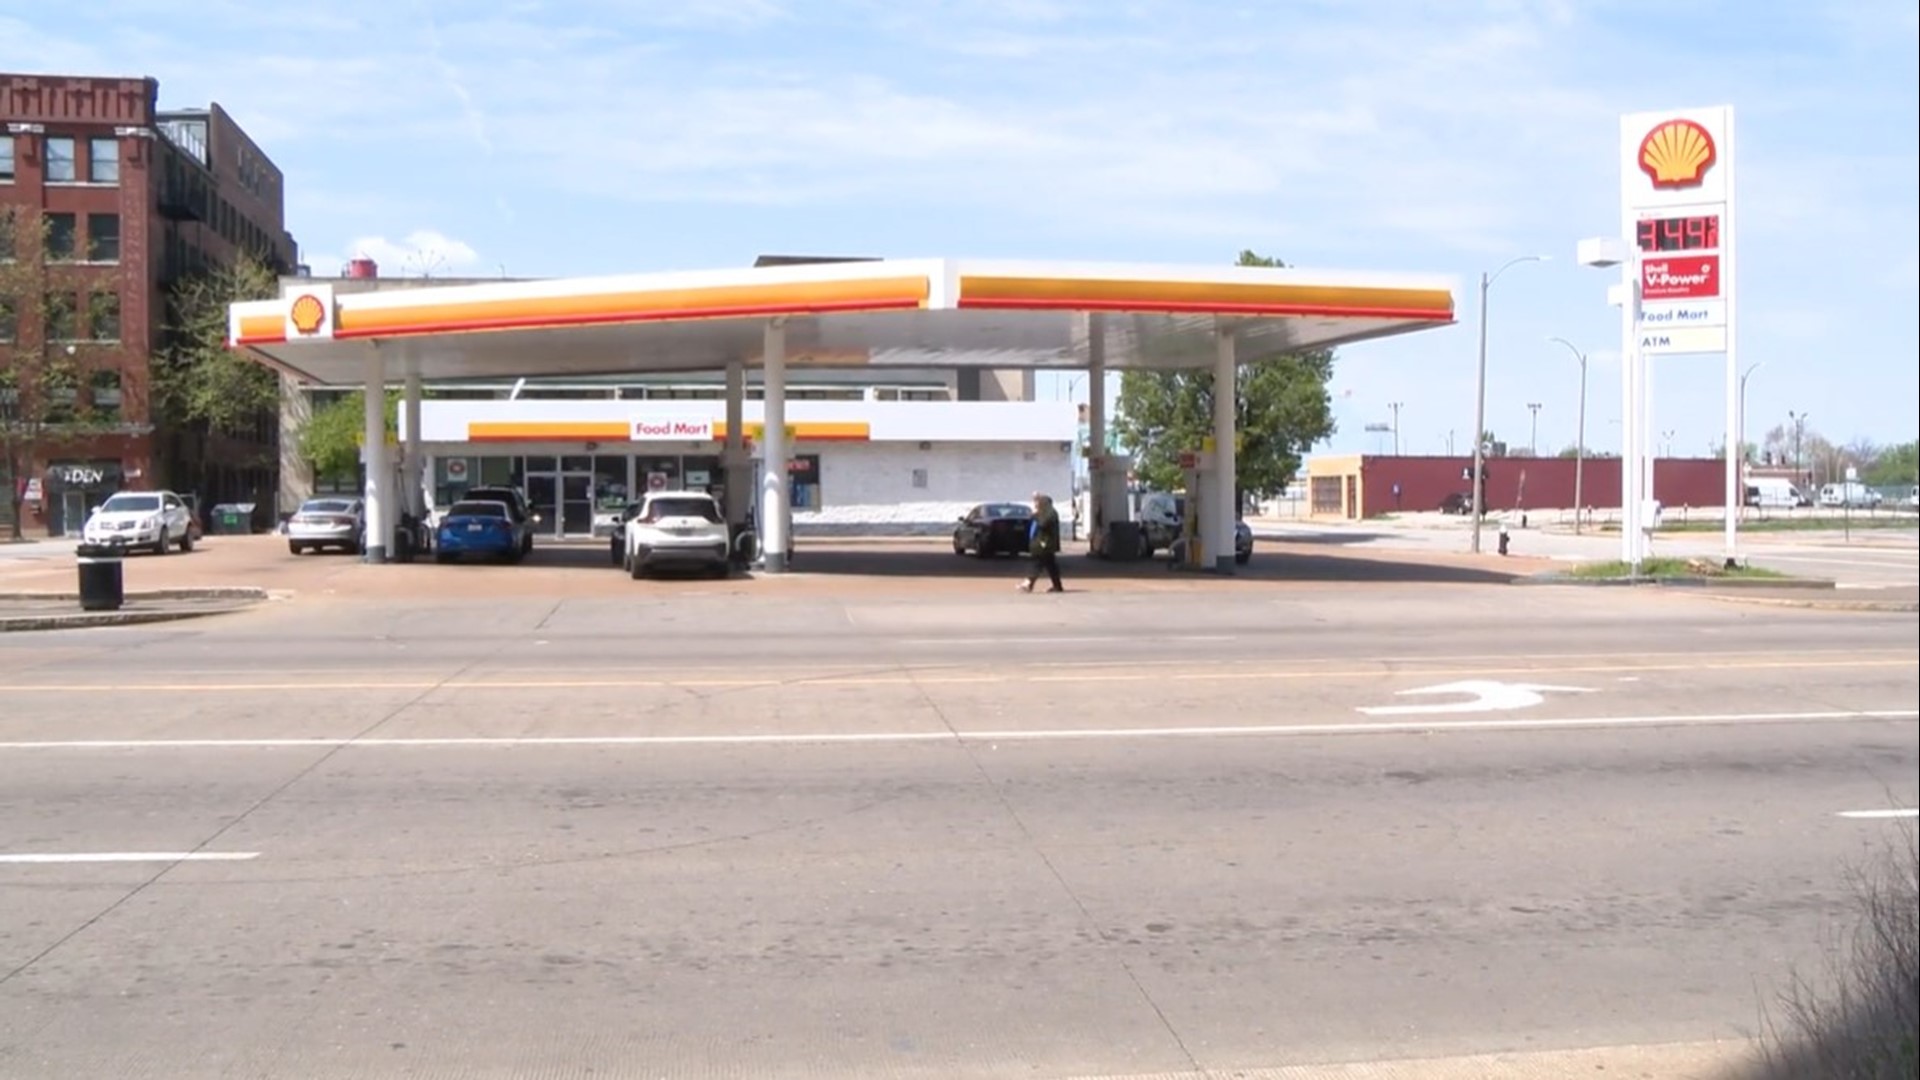 Two separate lawsuits were filed against the gas station, including one with the help of a downtown resident. A judge ruled the gas station will close by Aug. 1.